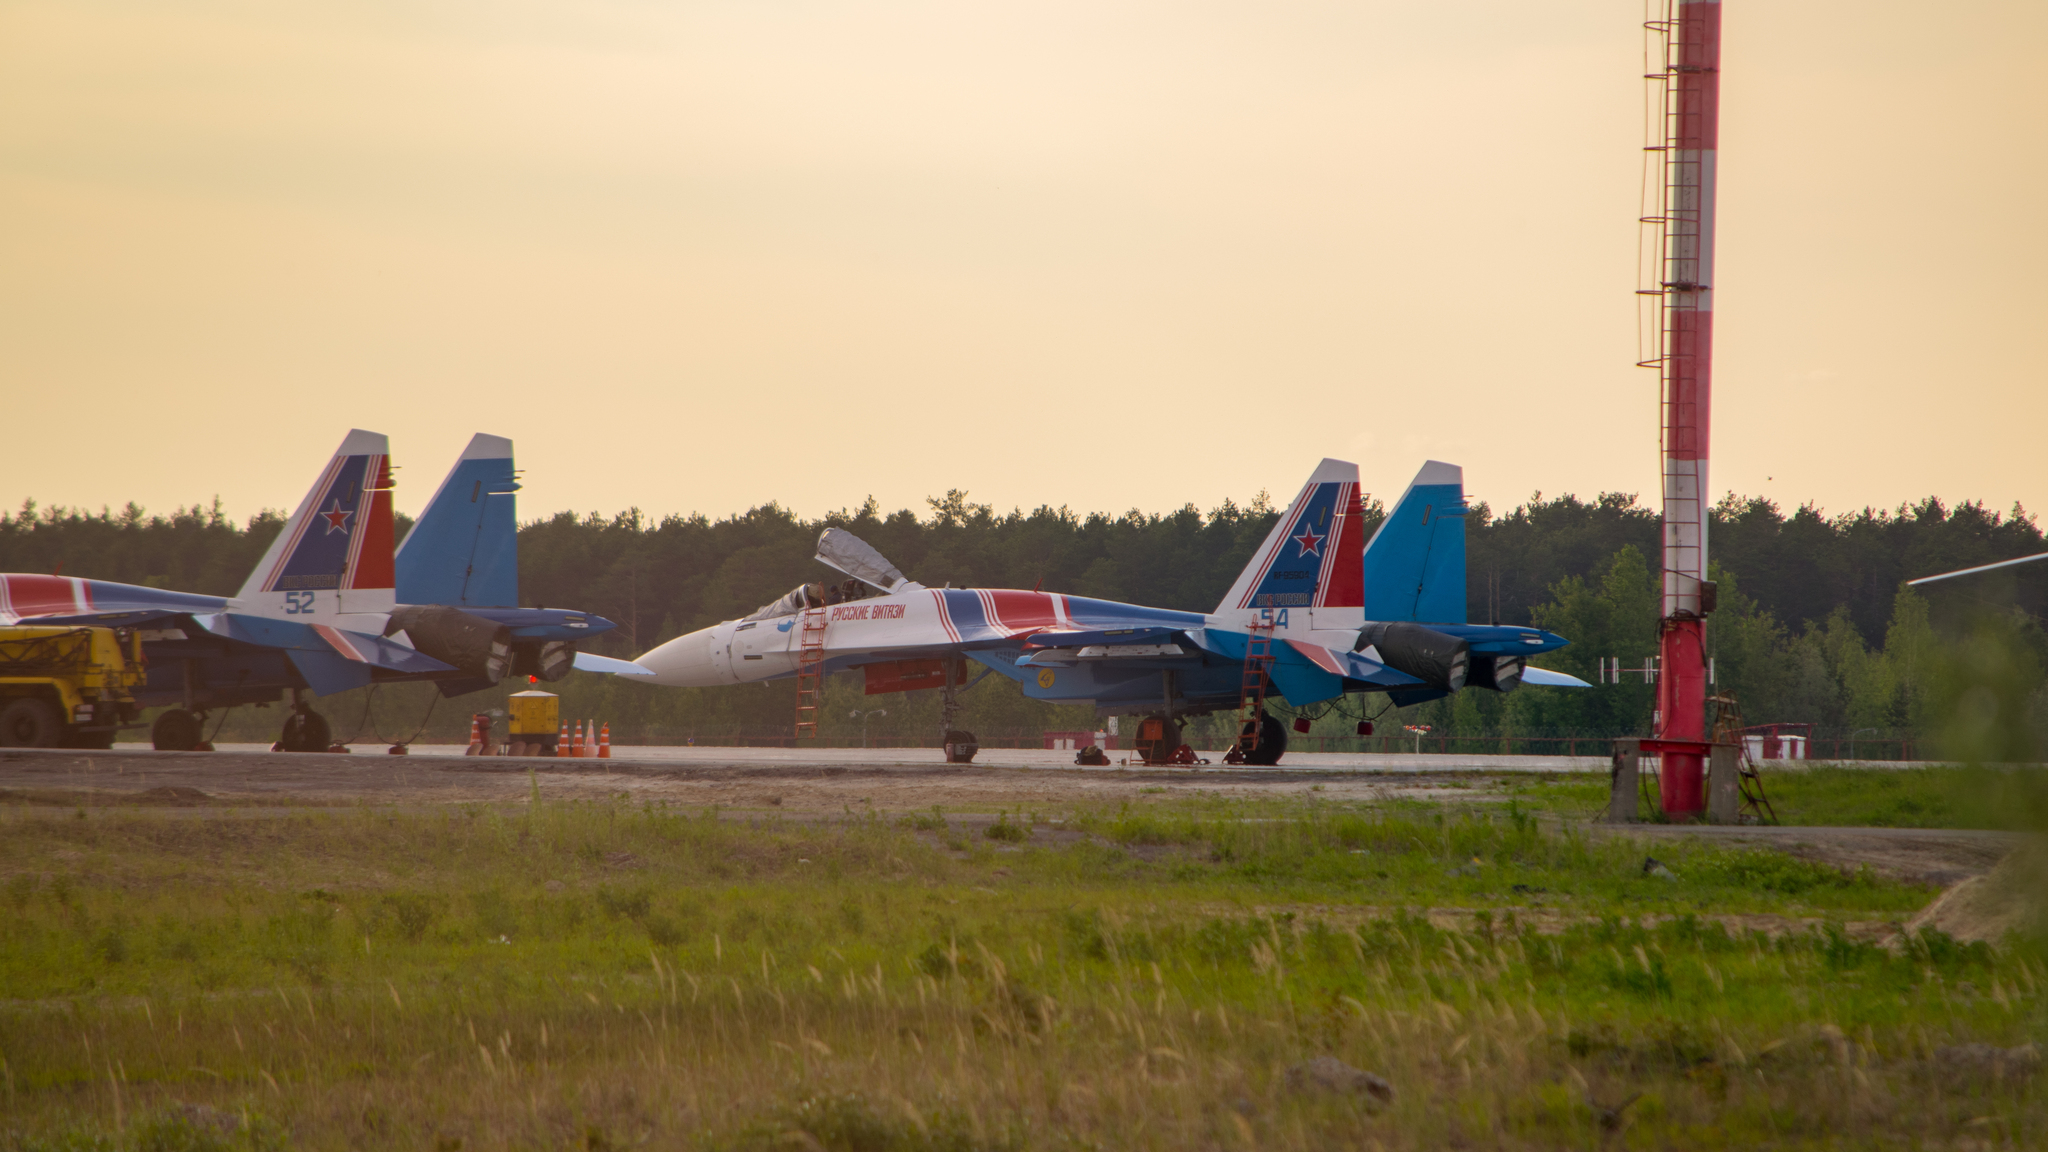 Russian knights and a little different aviation - Longpost, The airport, KhMAO, The photo, Surgut, Aviation, Russian Knights, My